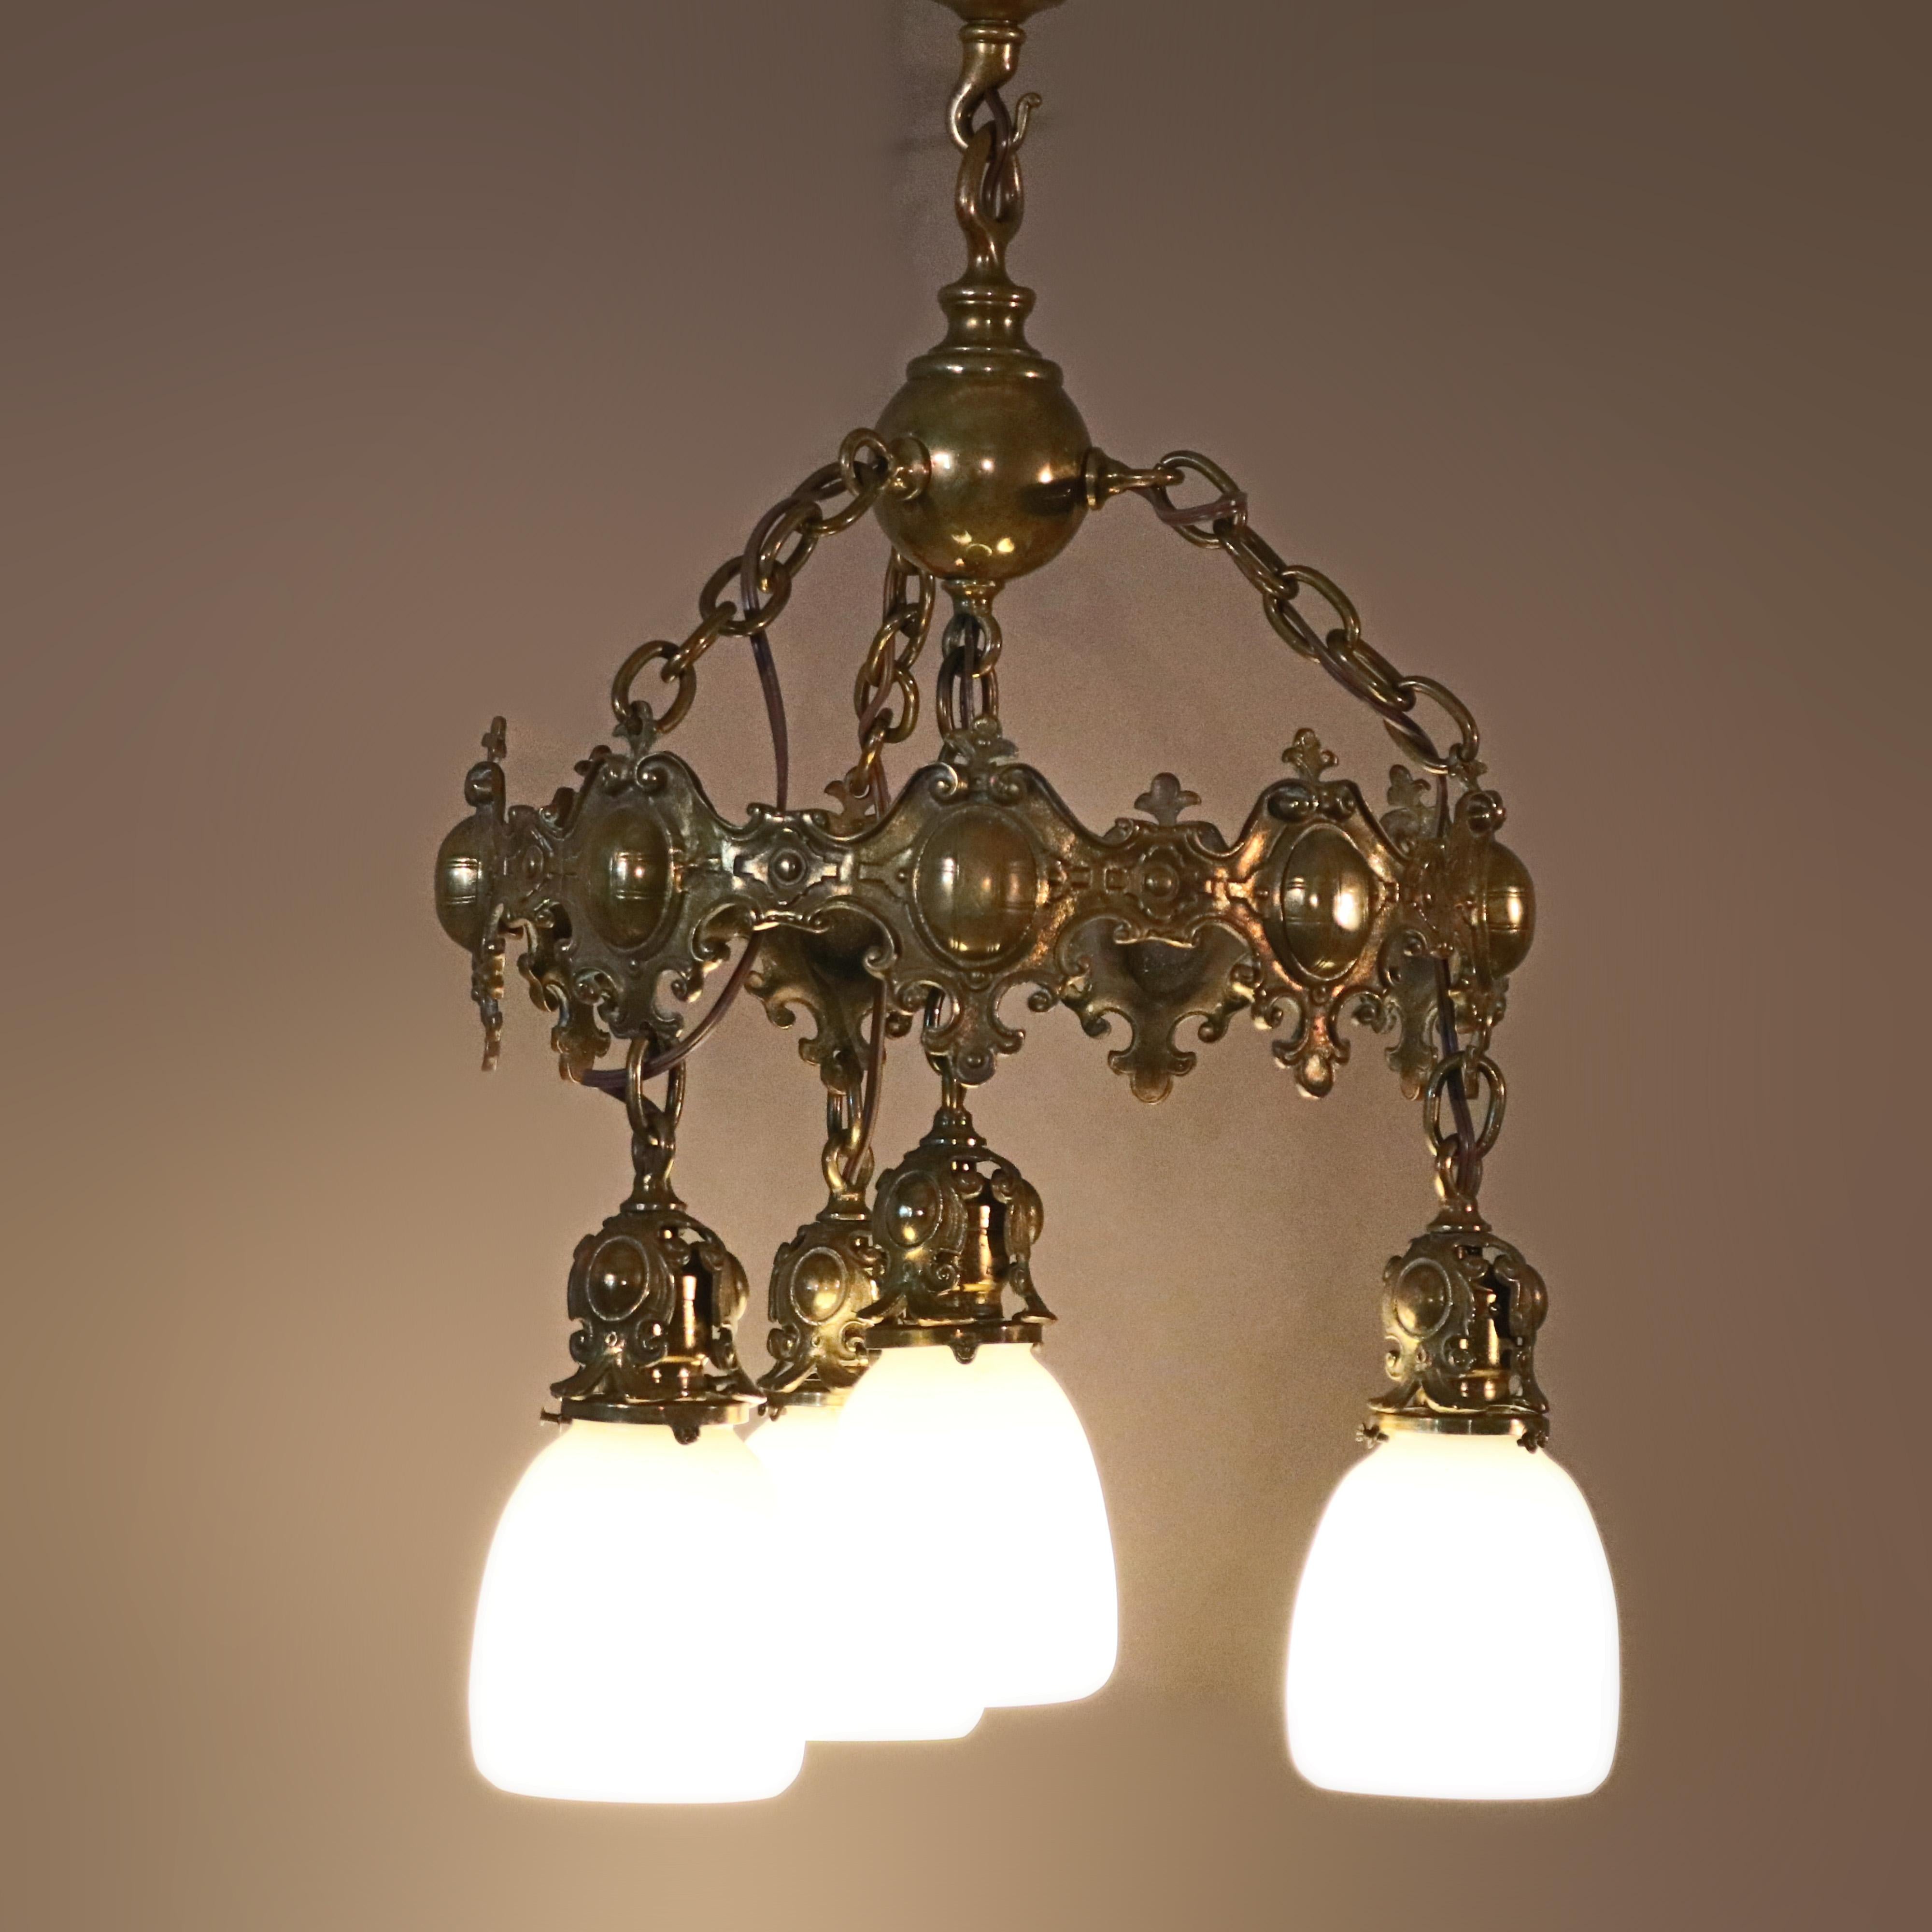 An antique Arts & Crafts Mission chandelier offers shield and foliate cast bronze frame with four drop lights having Steuben calcite shades, Gothic elements, 20th century.

Measures: 25.5